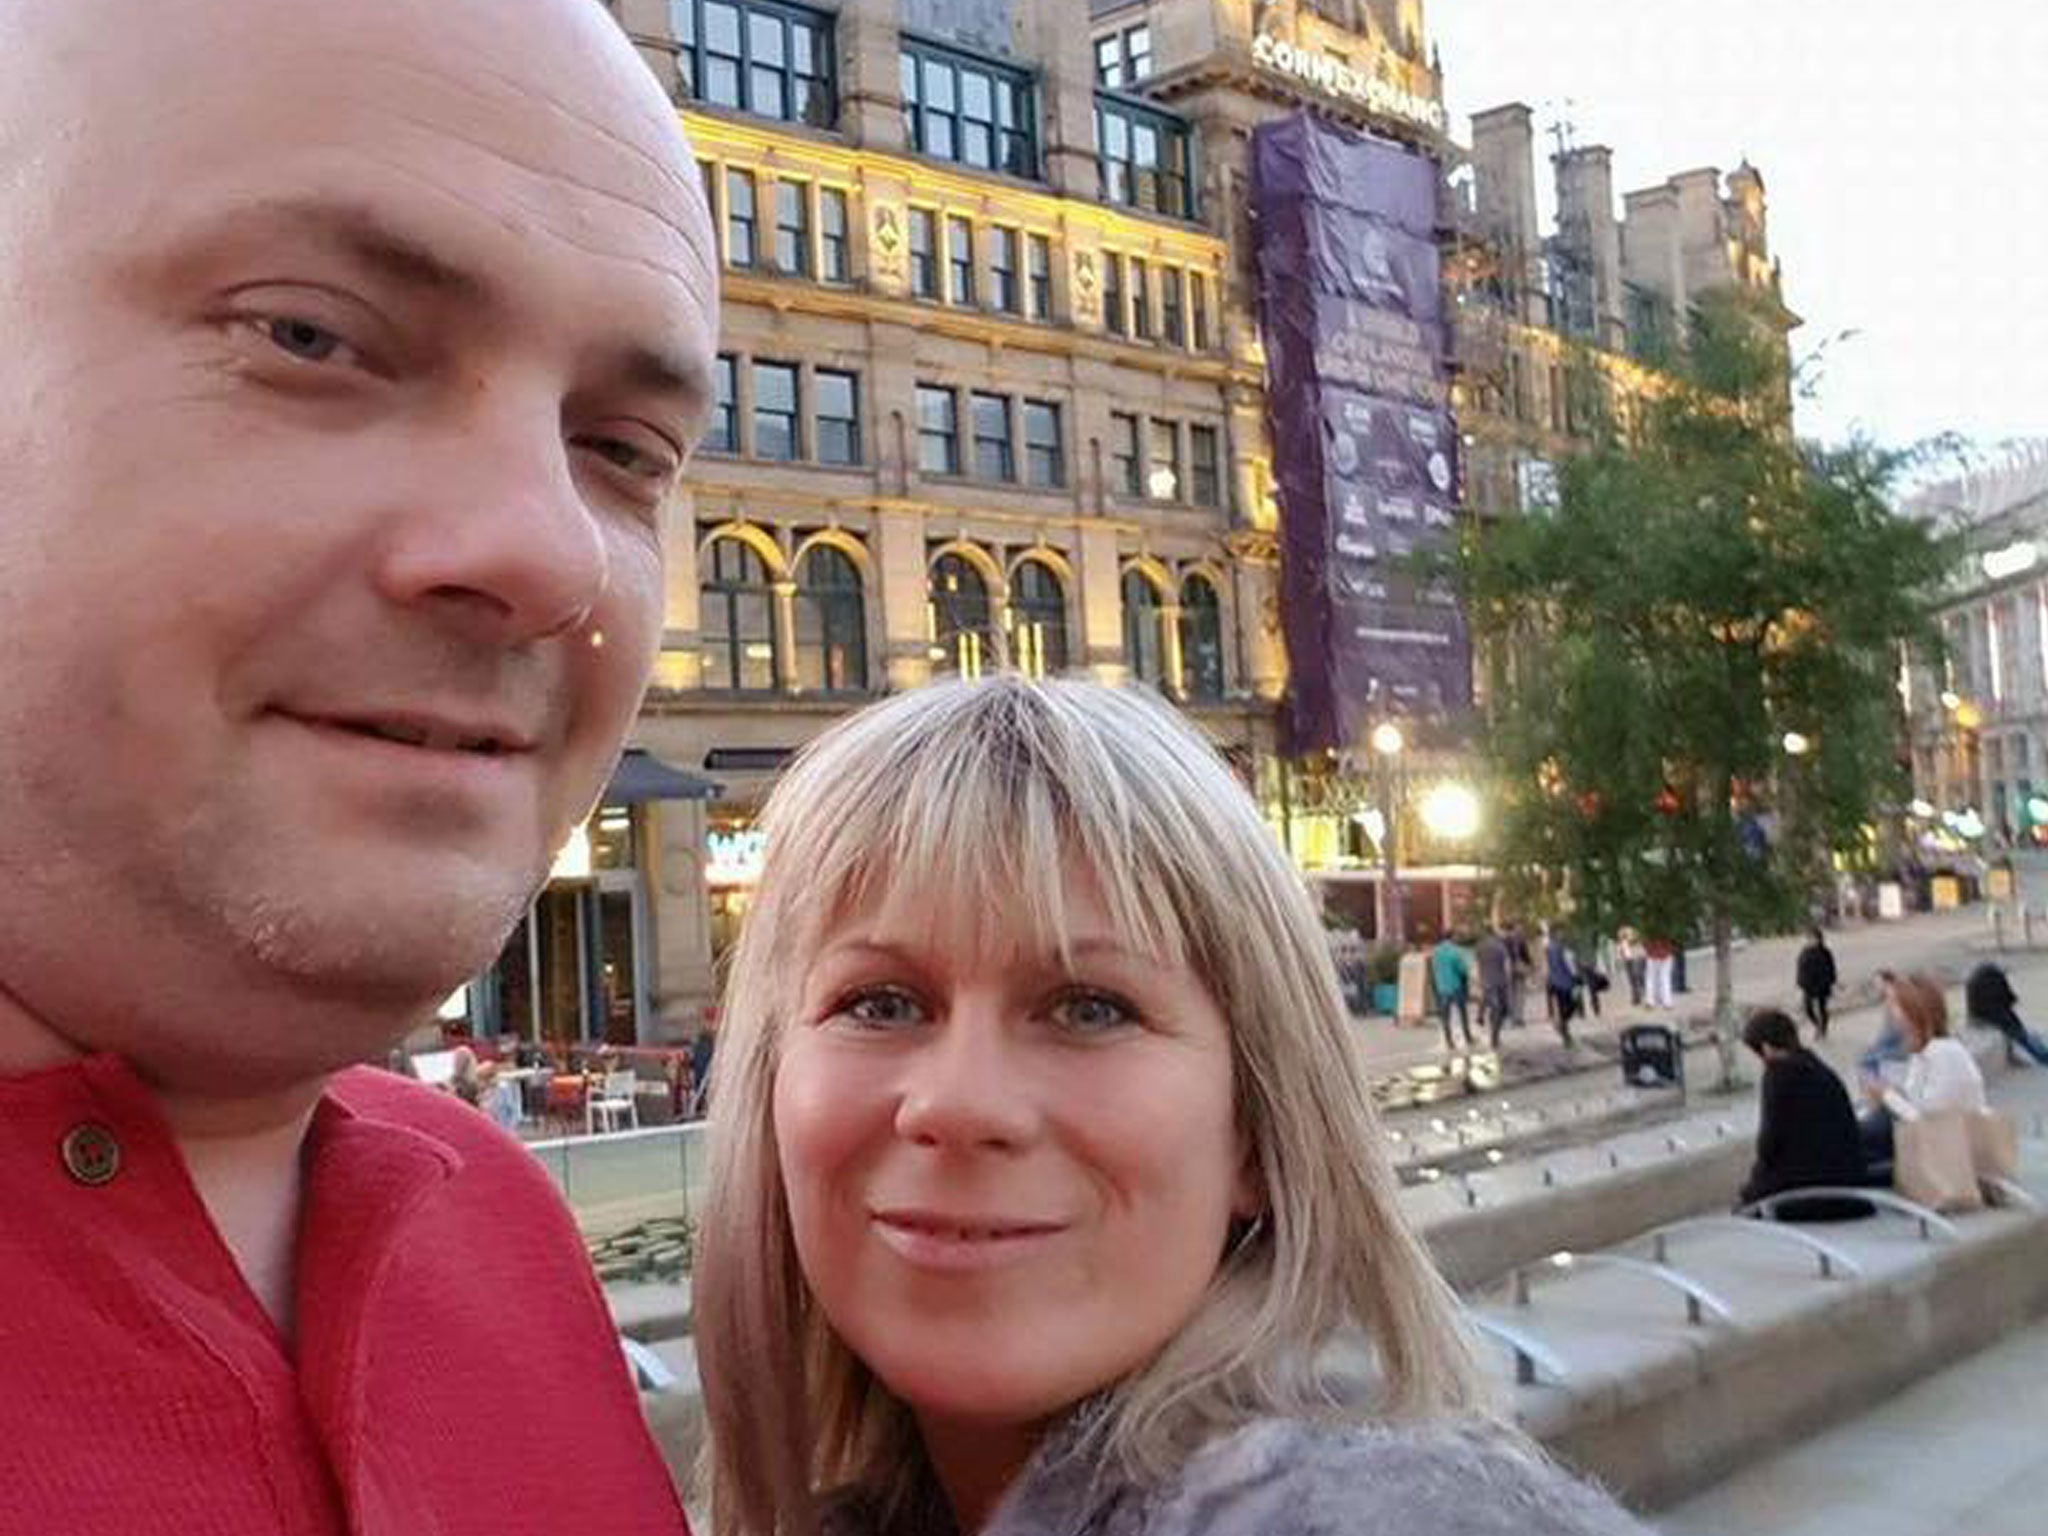 A selfie taken by Angelika and Marcin Klis shortly before the attack